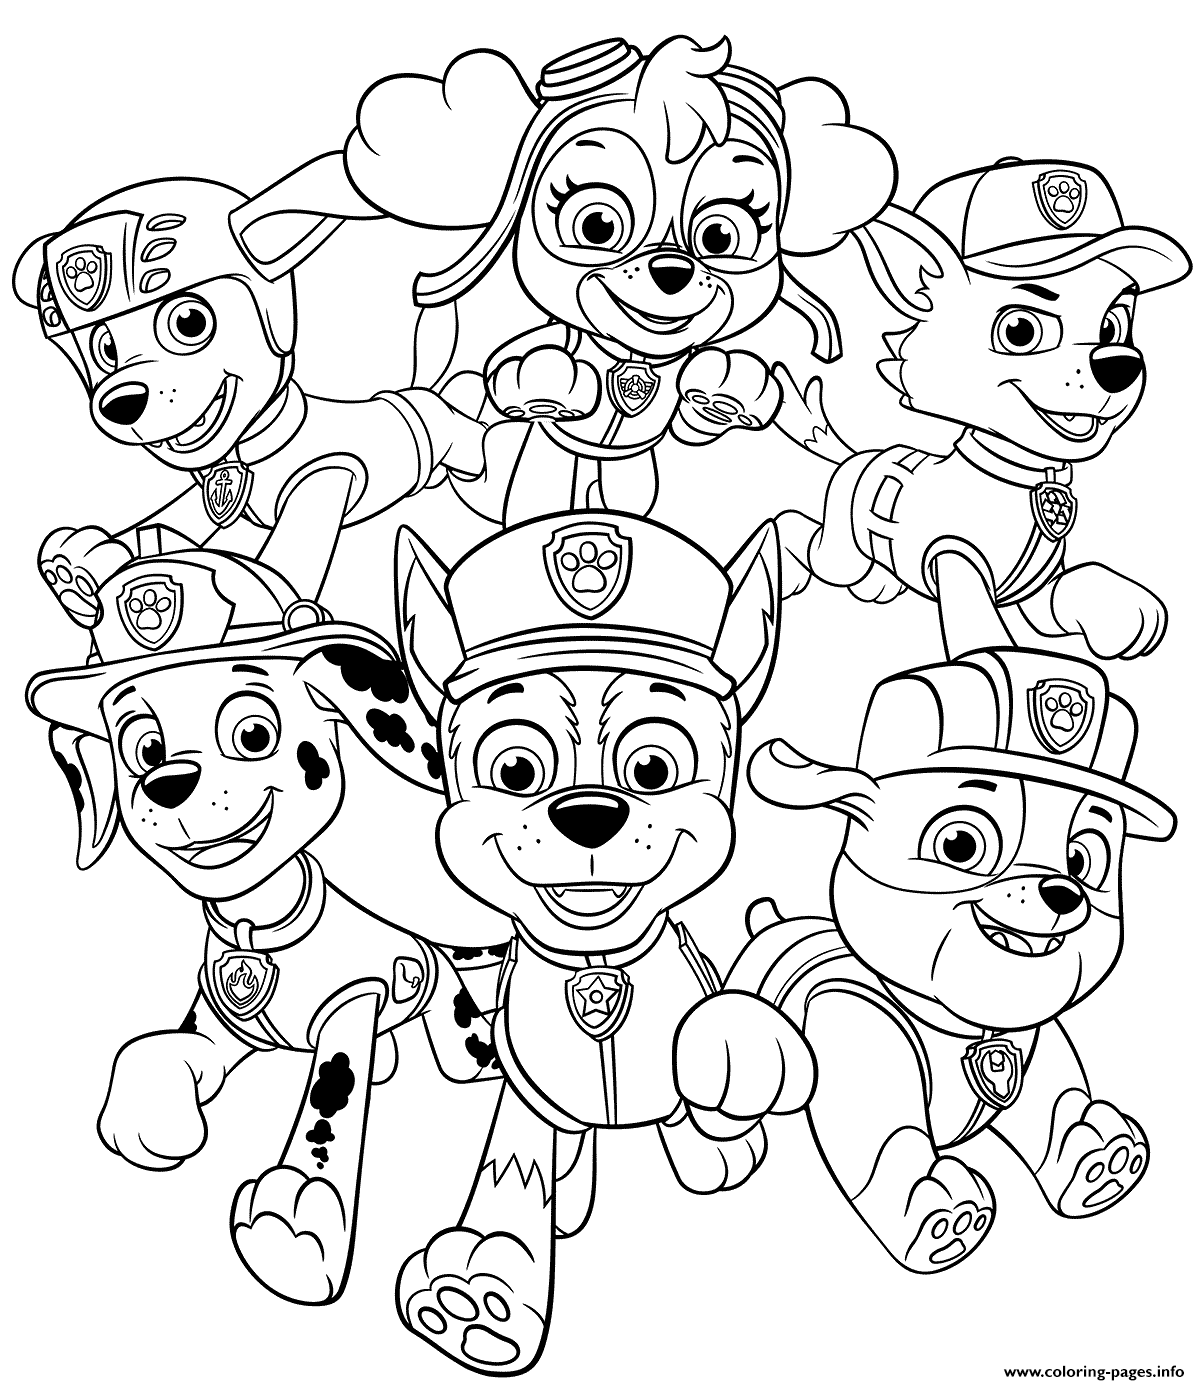 All Paw Patrol Pups coloring